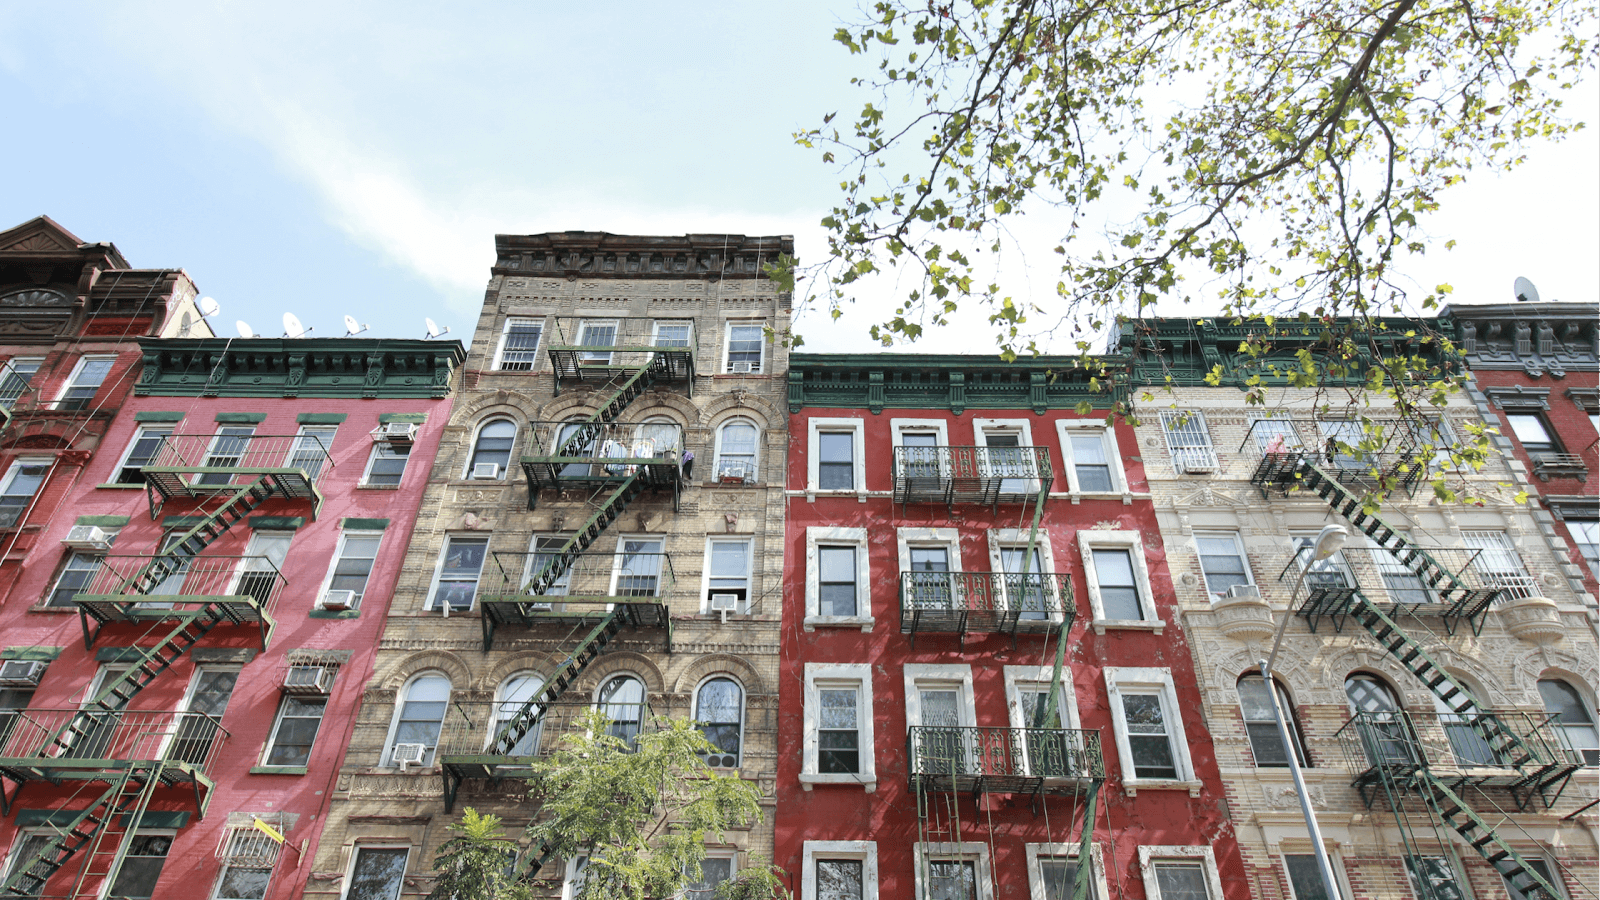 Finding rent stabilized apartments in NYC can be tricky. What is rent-stabilization and how do you know if your apartment is stabilized?